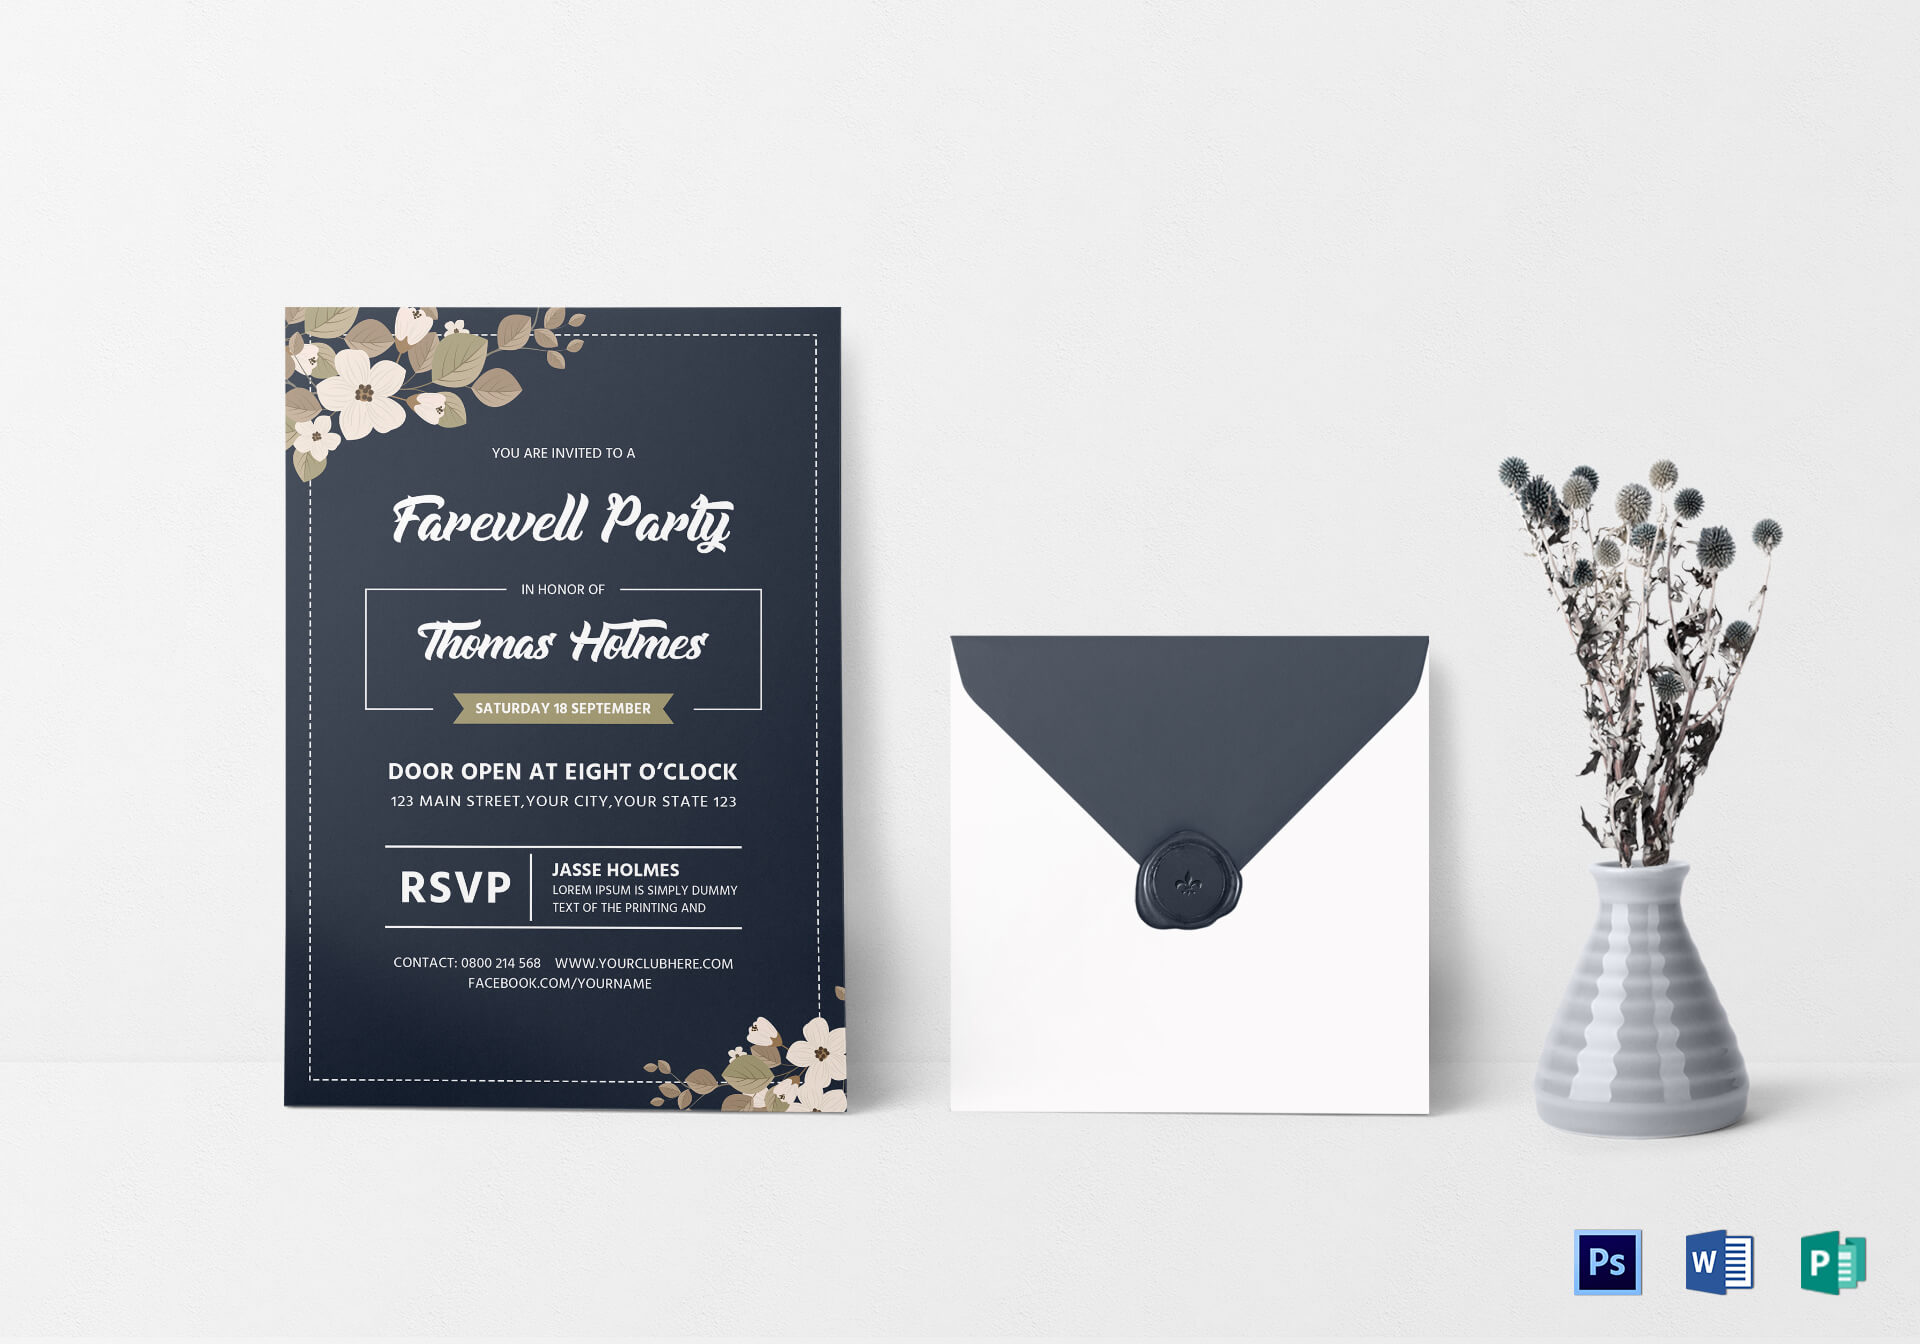 Farewell Party Invitation Card Template Regarding Farewell For Farewell Card Template Word